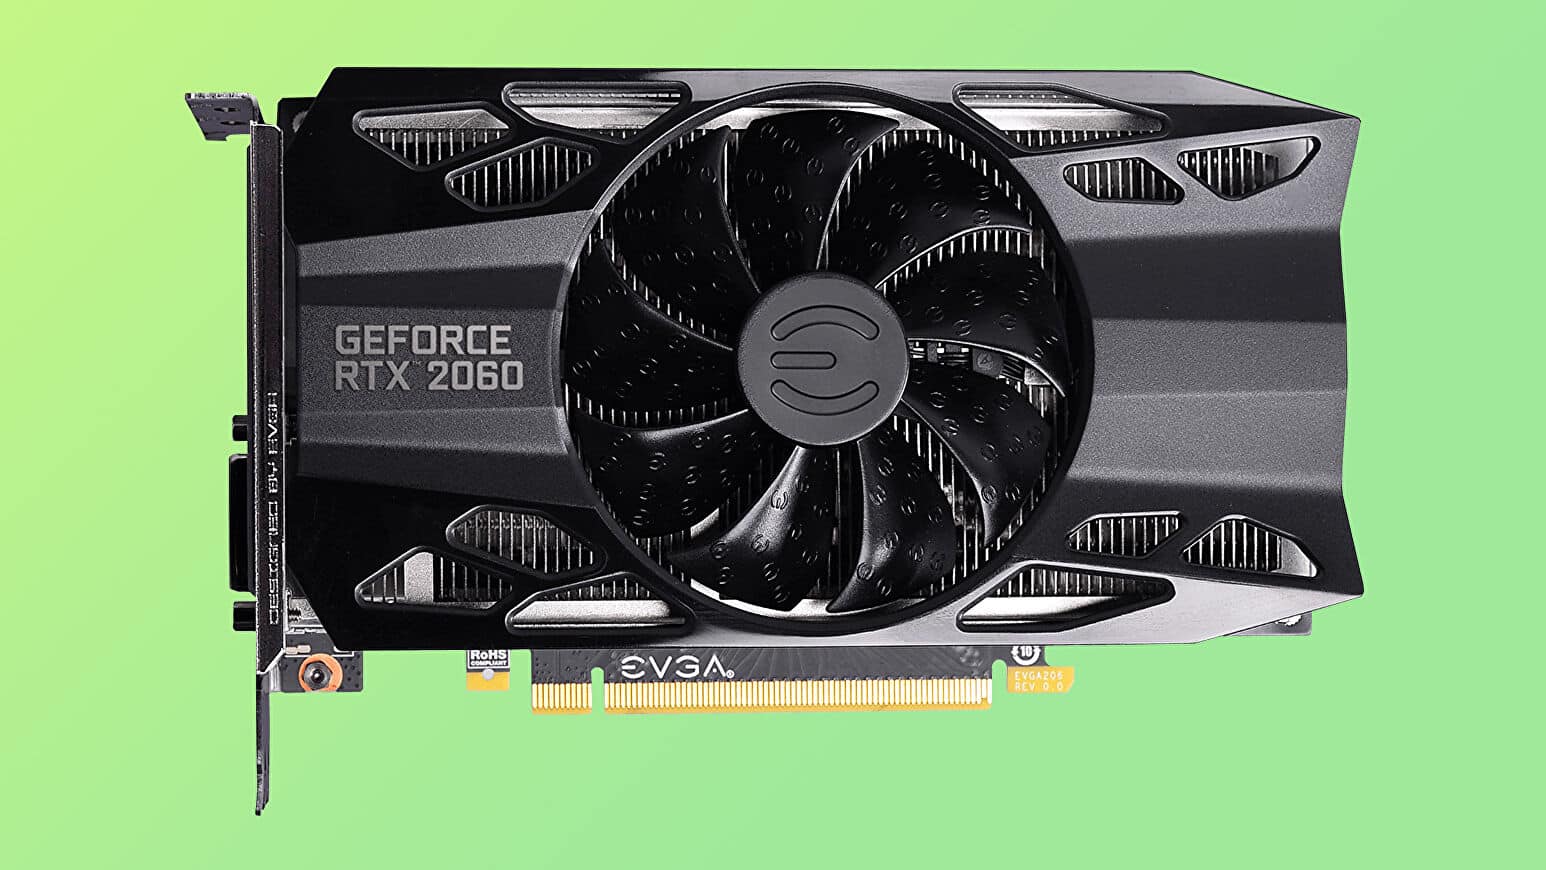 Pick up an RTX graphics card for £212 today